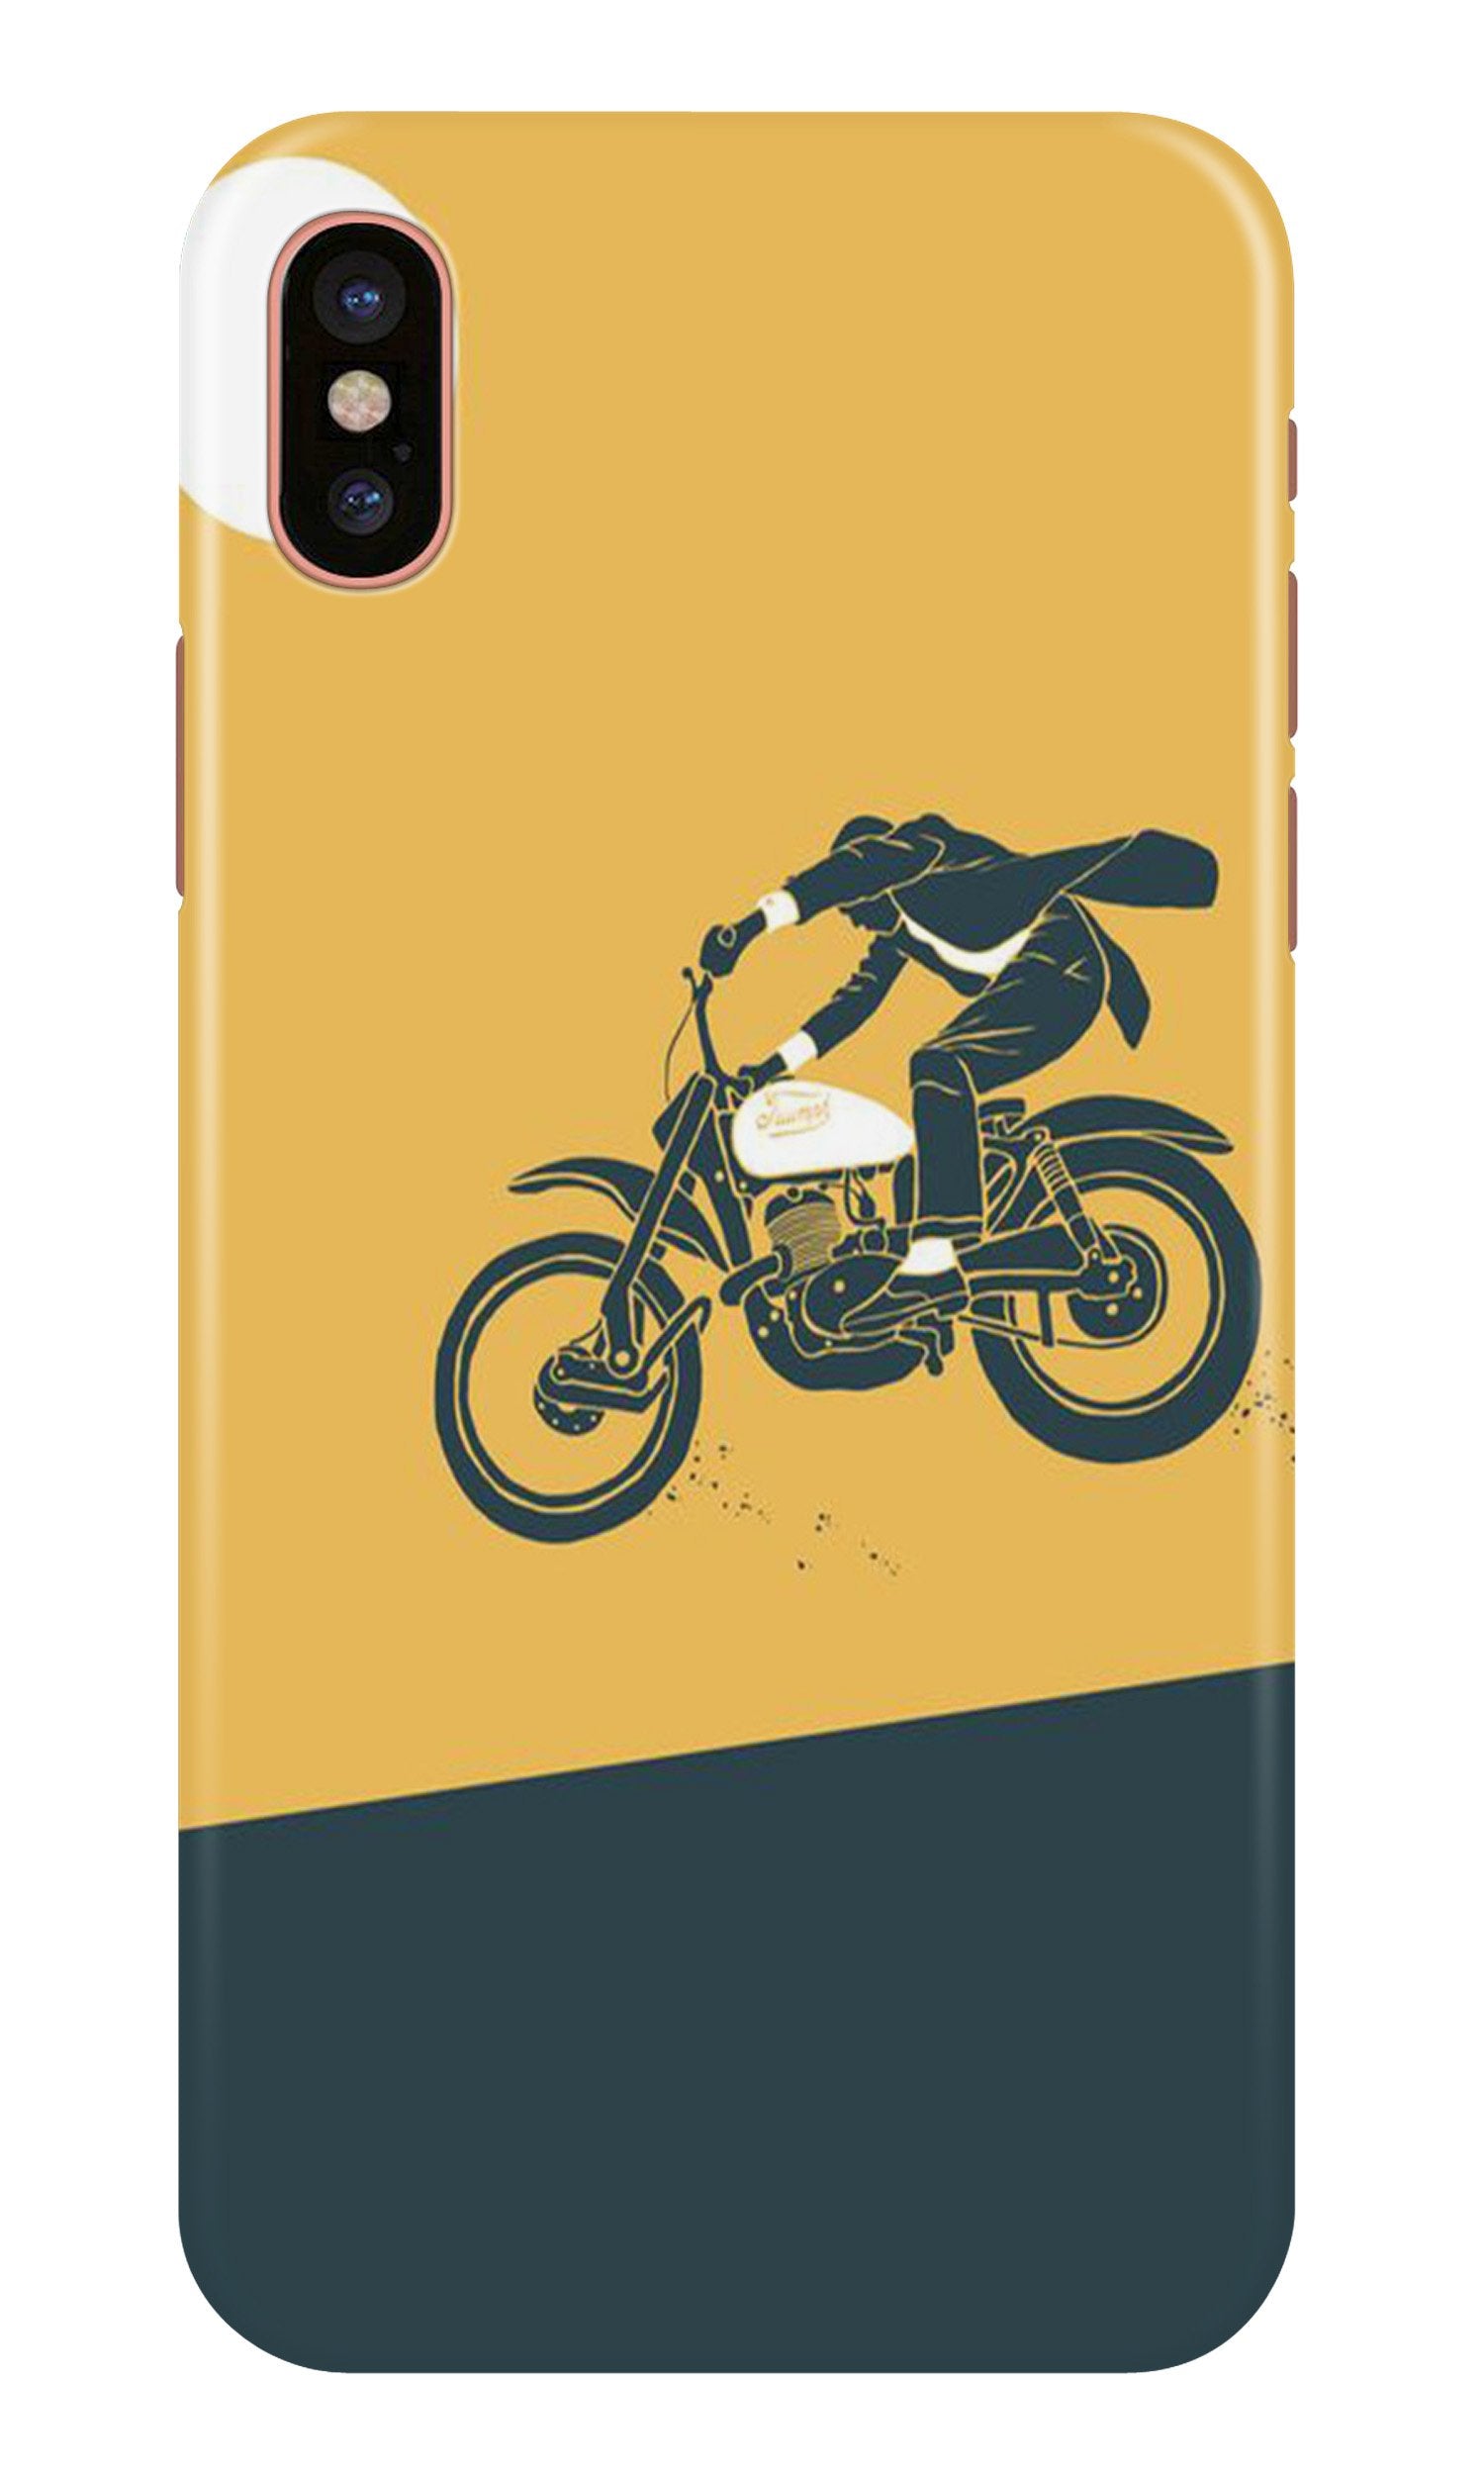 Bike Lovers Case for iPhone Xs (Design No. 256)